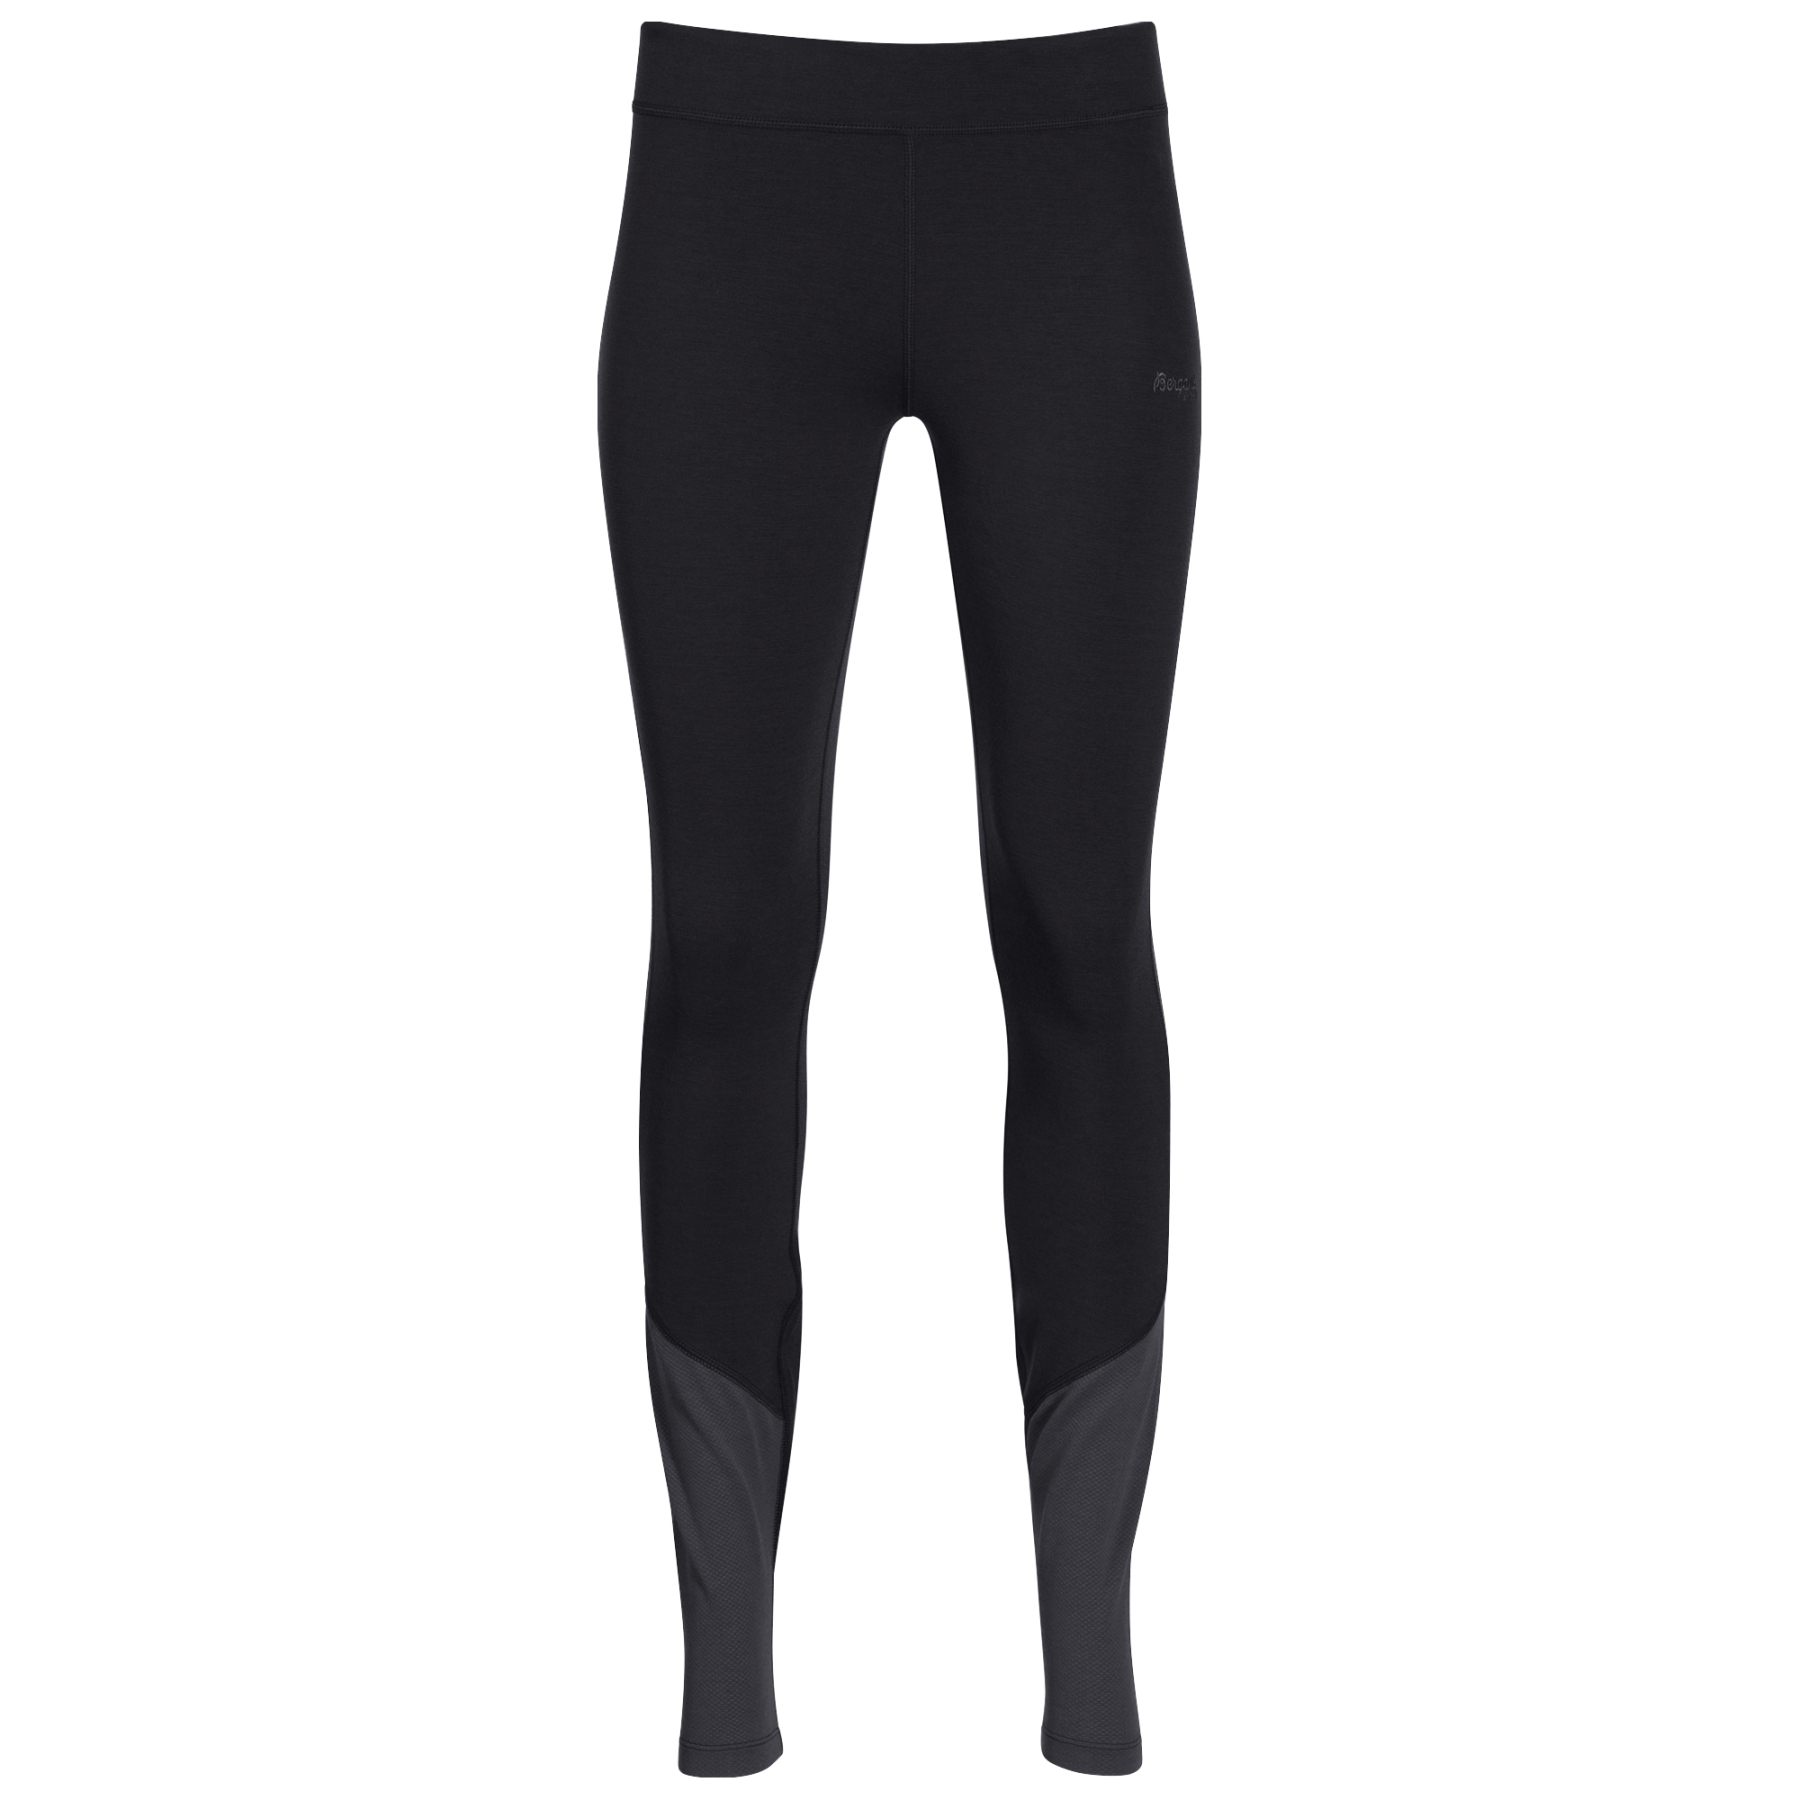 Image of Bergans Cecilie Wool Women's Tights - black/solid charcoal